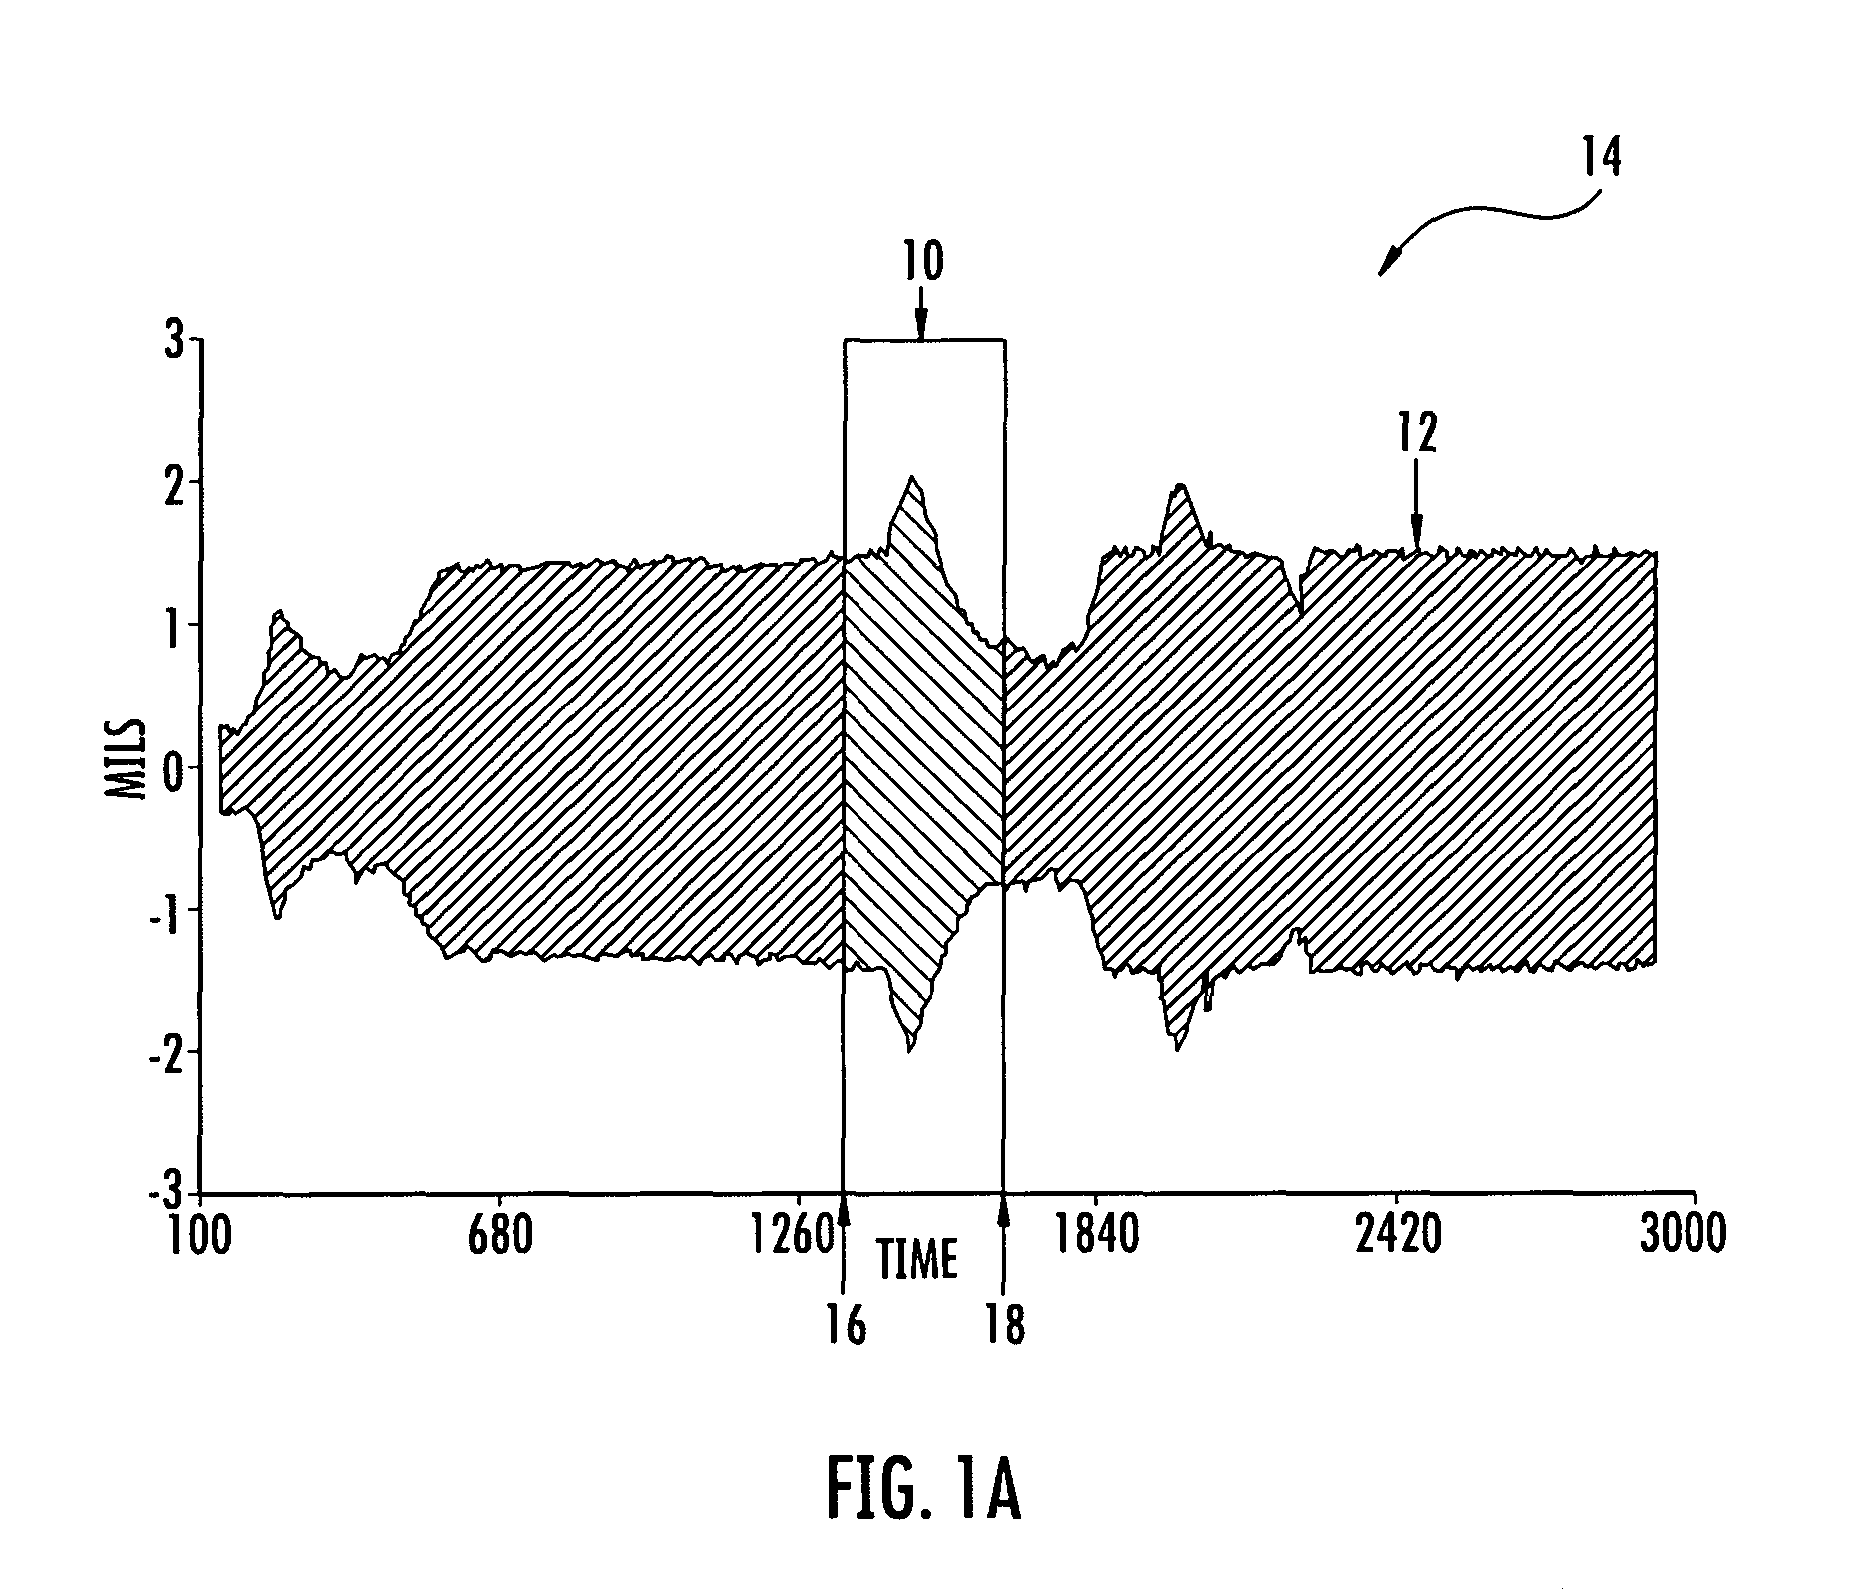 Method and apparatus for identifying a region of interest of transient vibration data requiring analysis